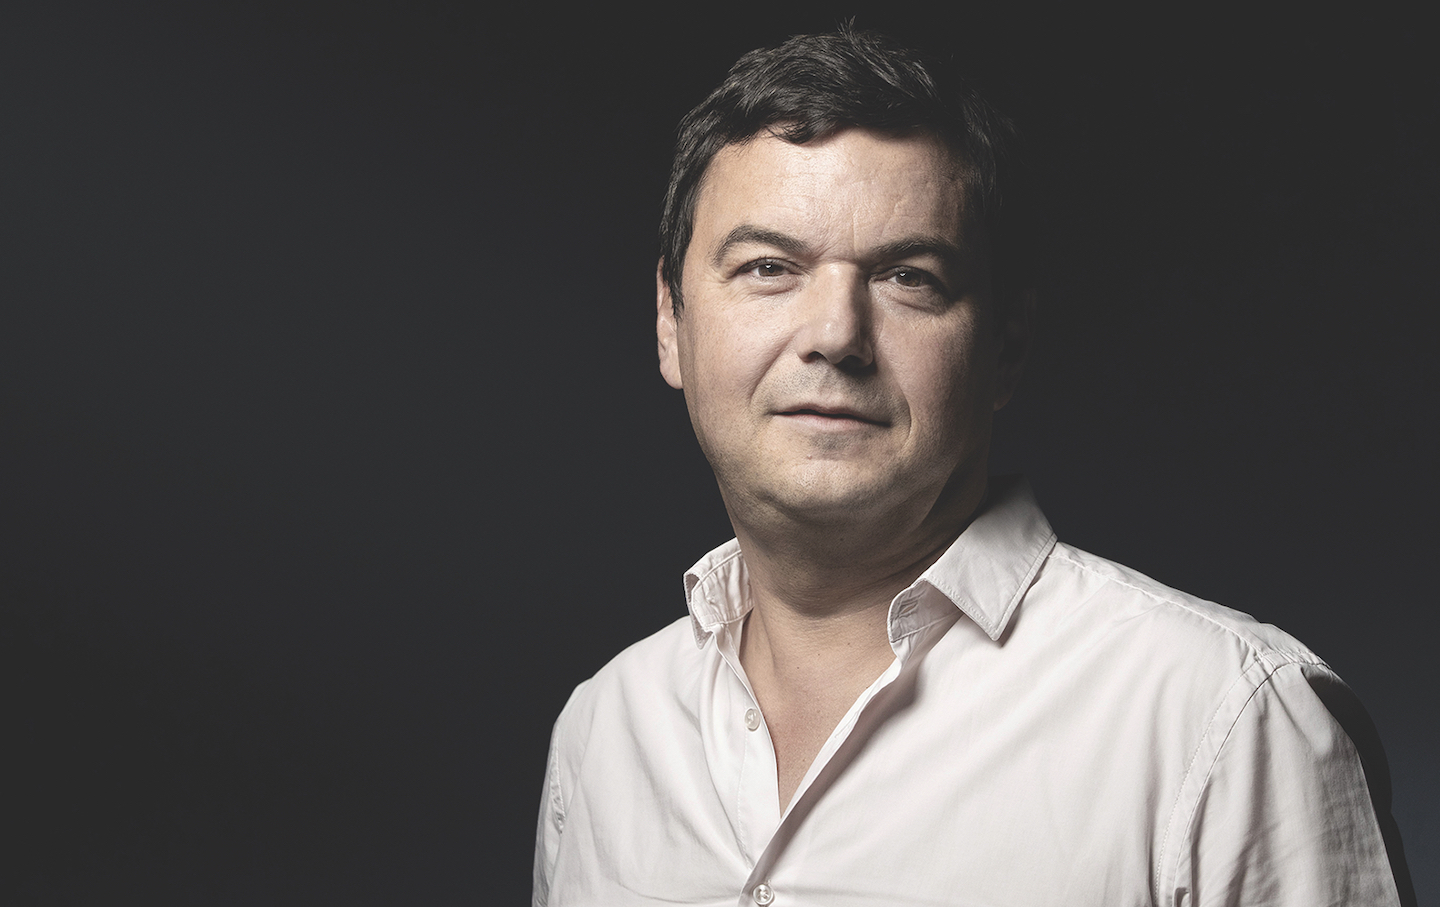 Thomas Piketty: Confronting Our Long History of Massive Inequality